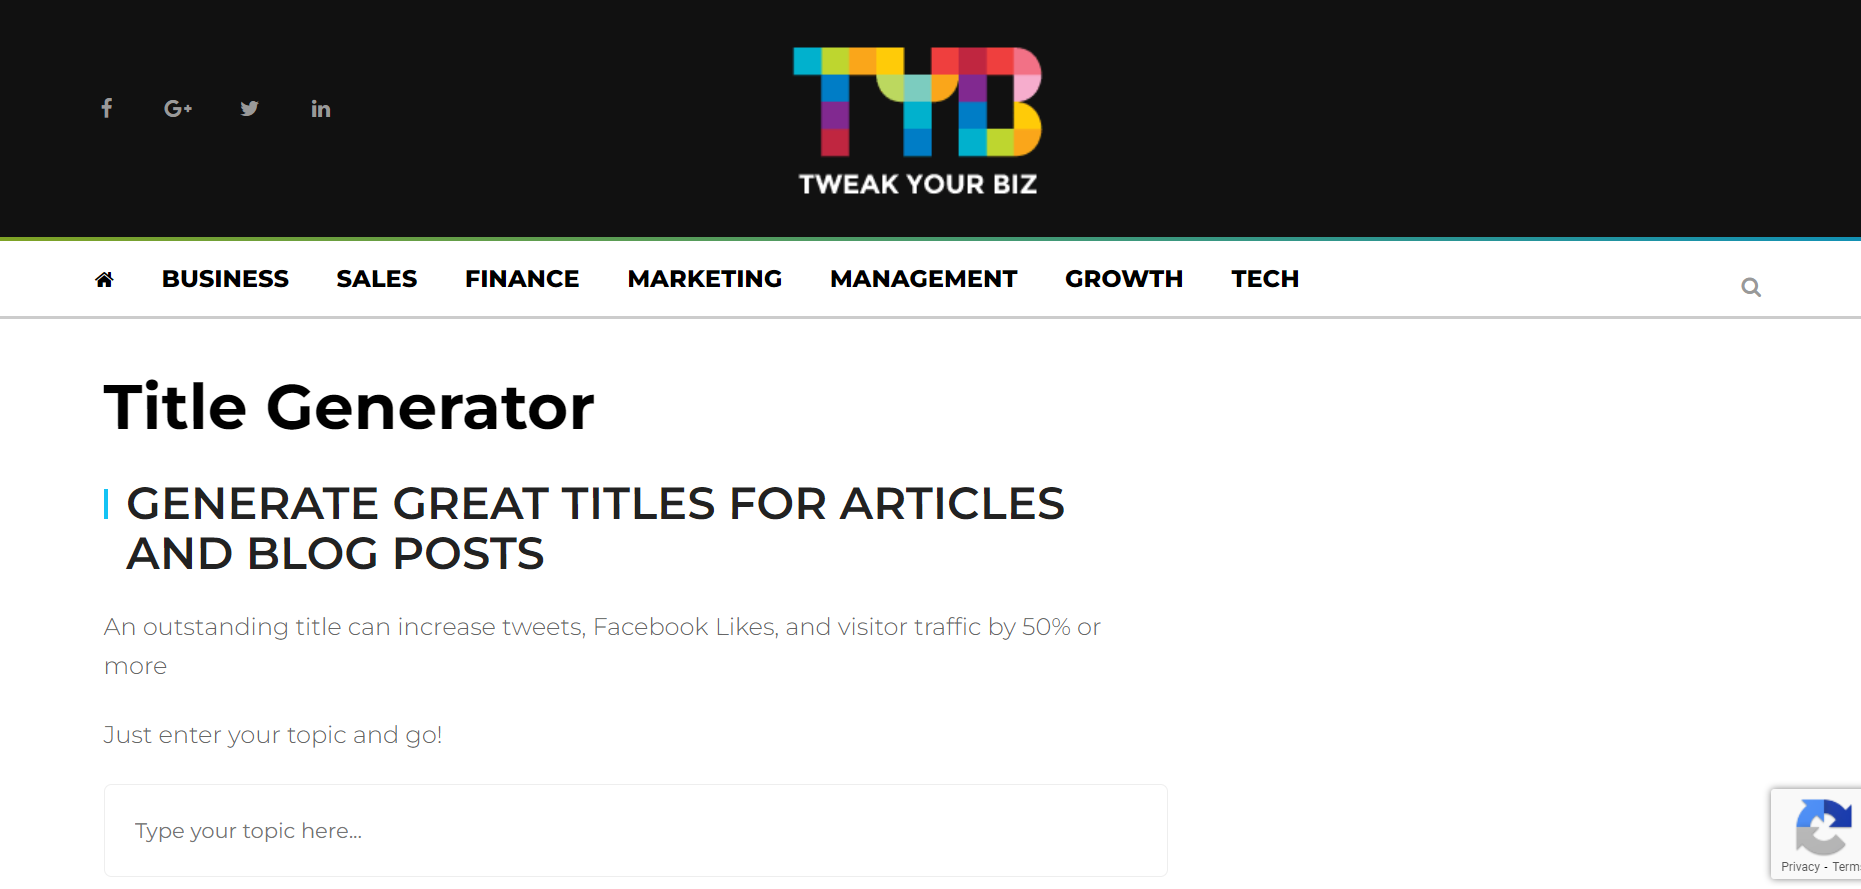 Most people don't get beyond your headline, so get a catchy one with Tweak Your Biz.